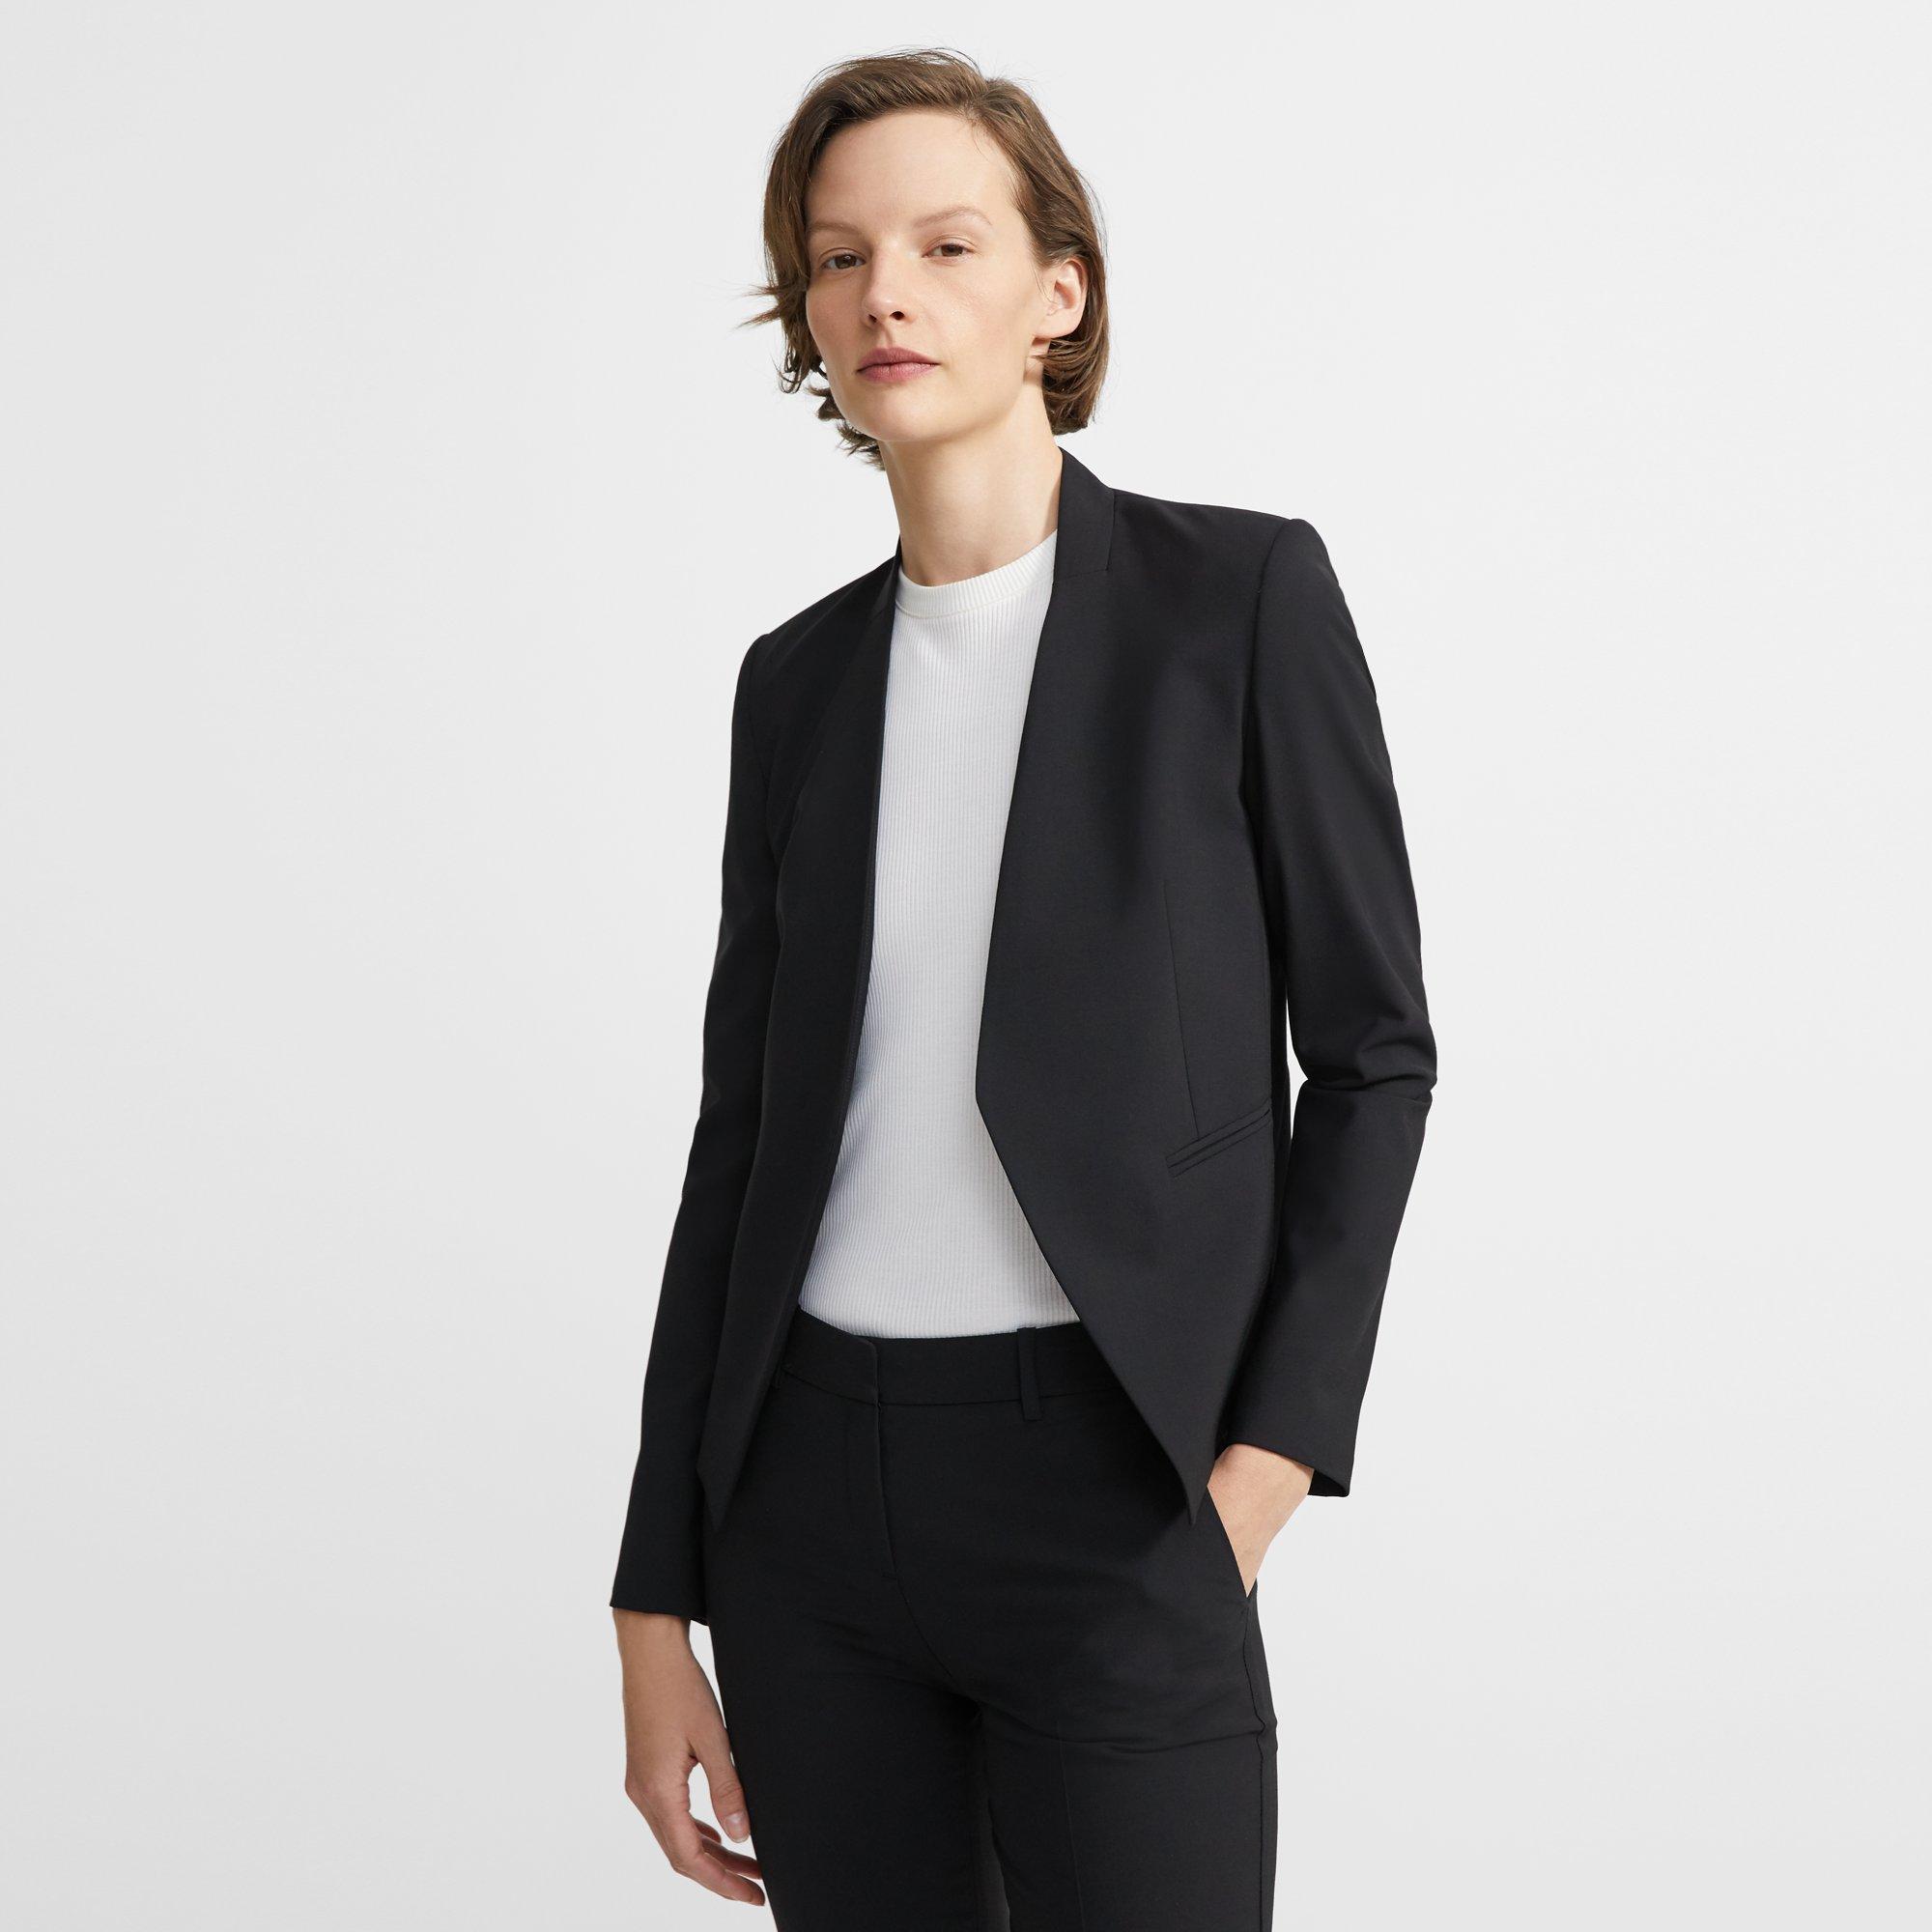 Women's Classic Dresses, Tops, Jackets, and Pants | Theory